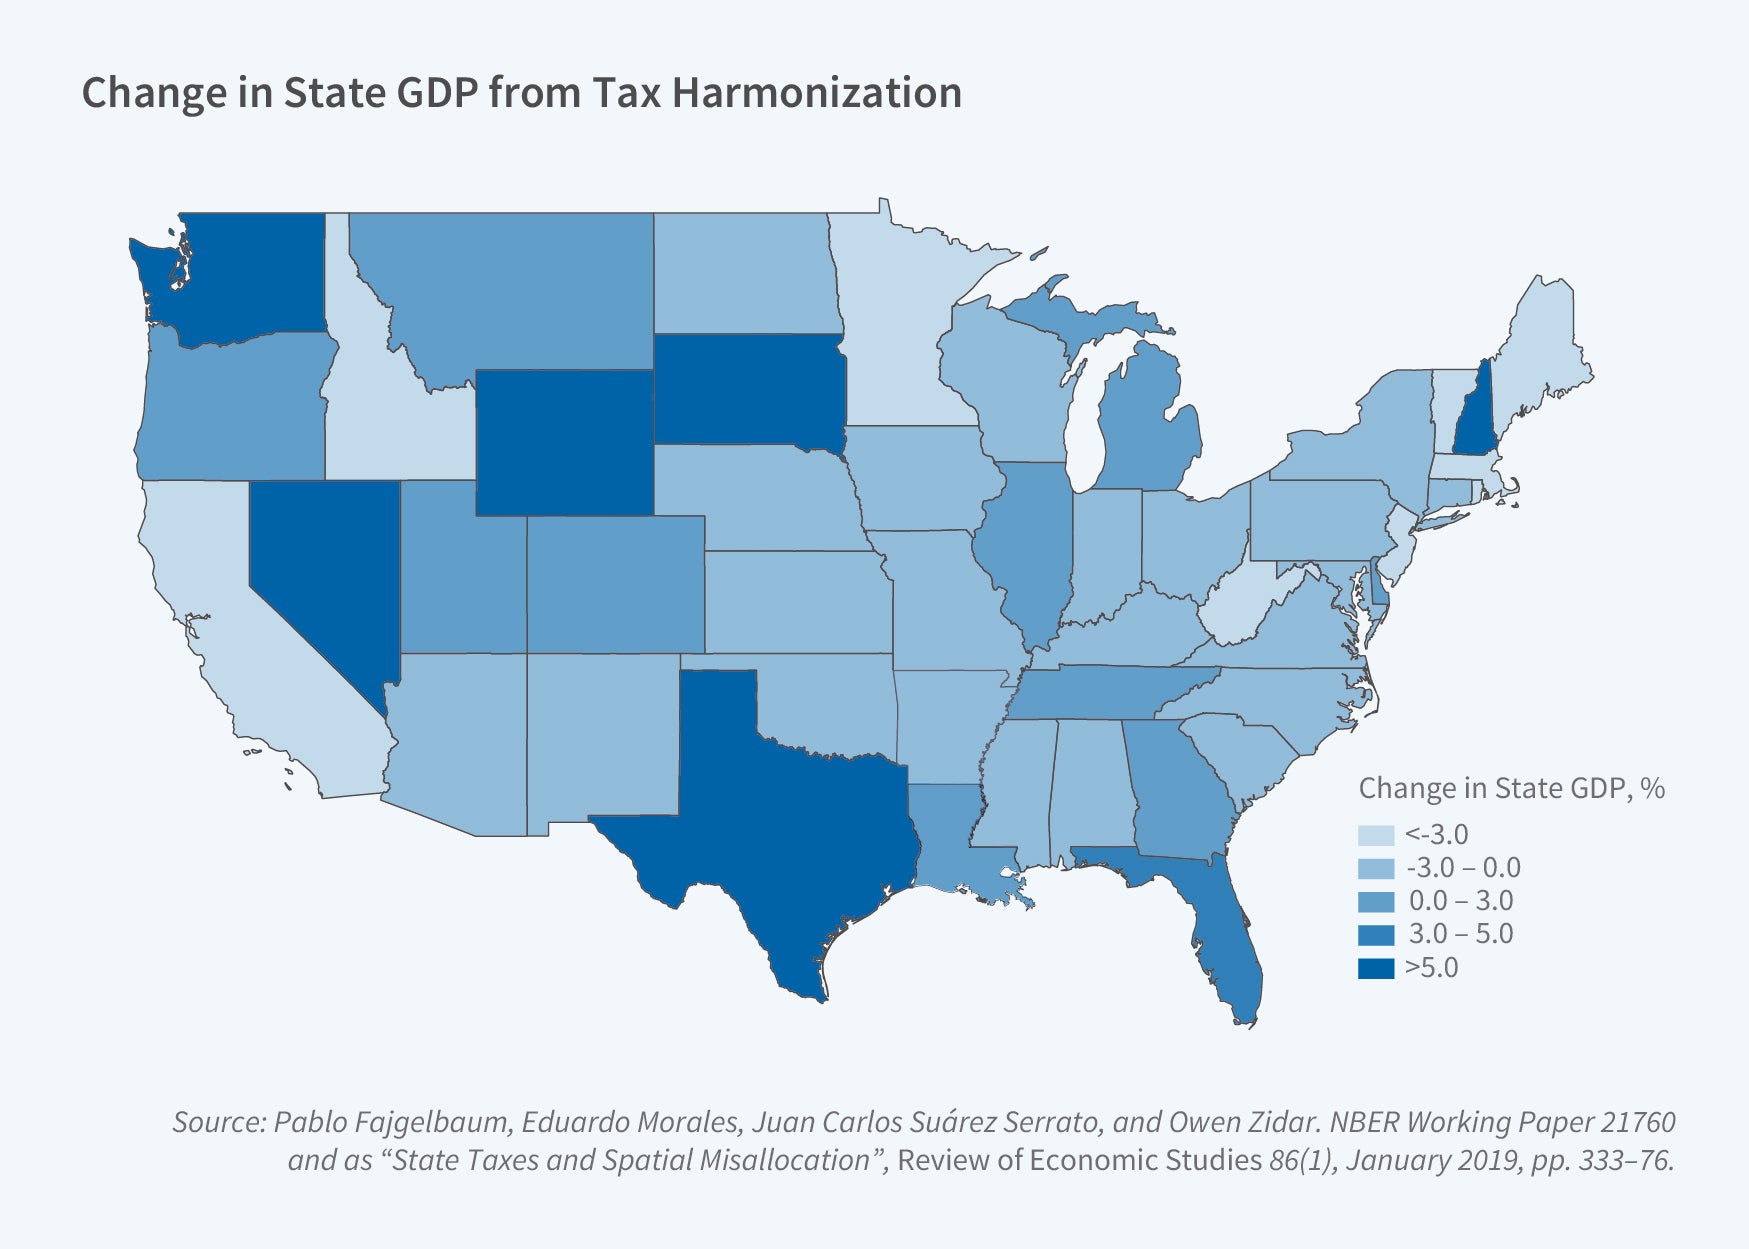 This figure is a map of the United States, broken down into states, titled, Change in State GDP from Tax Harmonization. There is a legend labeled, Change in State GDP, Percent.  The ranges for the for legend are: less than negative 3, negative 3 to 0, 0 to 3, 3 to 5, and greater than 5. All of them are represented by different shades of blue. The shades of blue ascend in order as less than negative 3 is the lightest shade and greater than 5 is the darkest shade. The majority of the states in the US are a light shade of blue. The states with darkest shades of blue are Texas, Washington, Nevada, Wyoming, South Dakota, and New Hampshire. The Source line reads, Source: Pablo Fajgelbaum, Eduardo Morales, Juan Carlos Suárez Serrato, and Owen Zidar. NBER Working Paper 21760 and as “State Taxes and Spatial Misallocation”, Review of Economic Studies 86(1), January 2019, pp. 333–76.